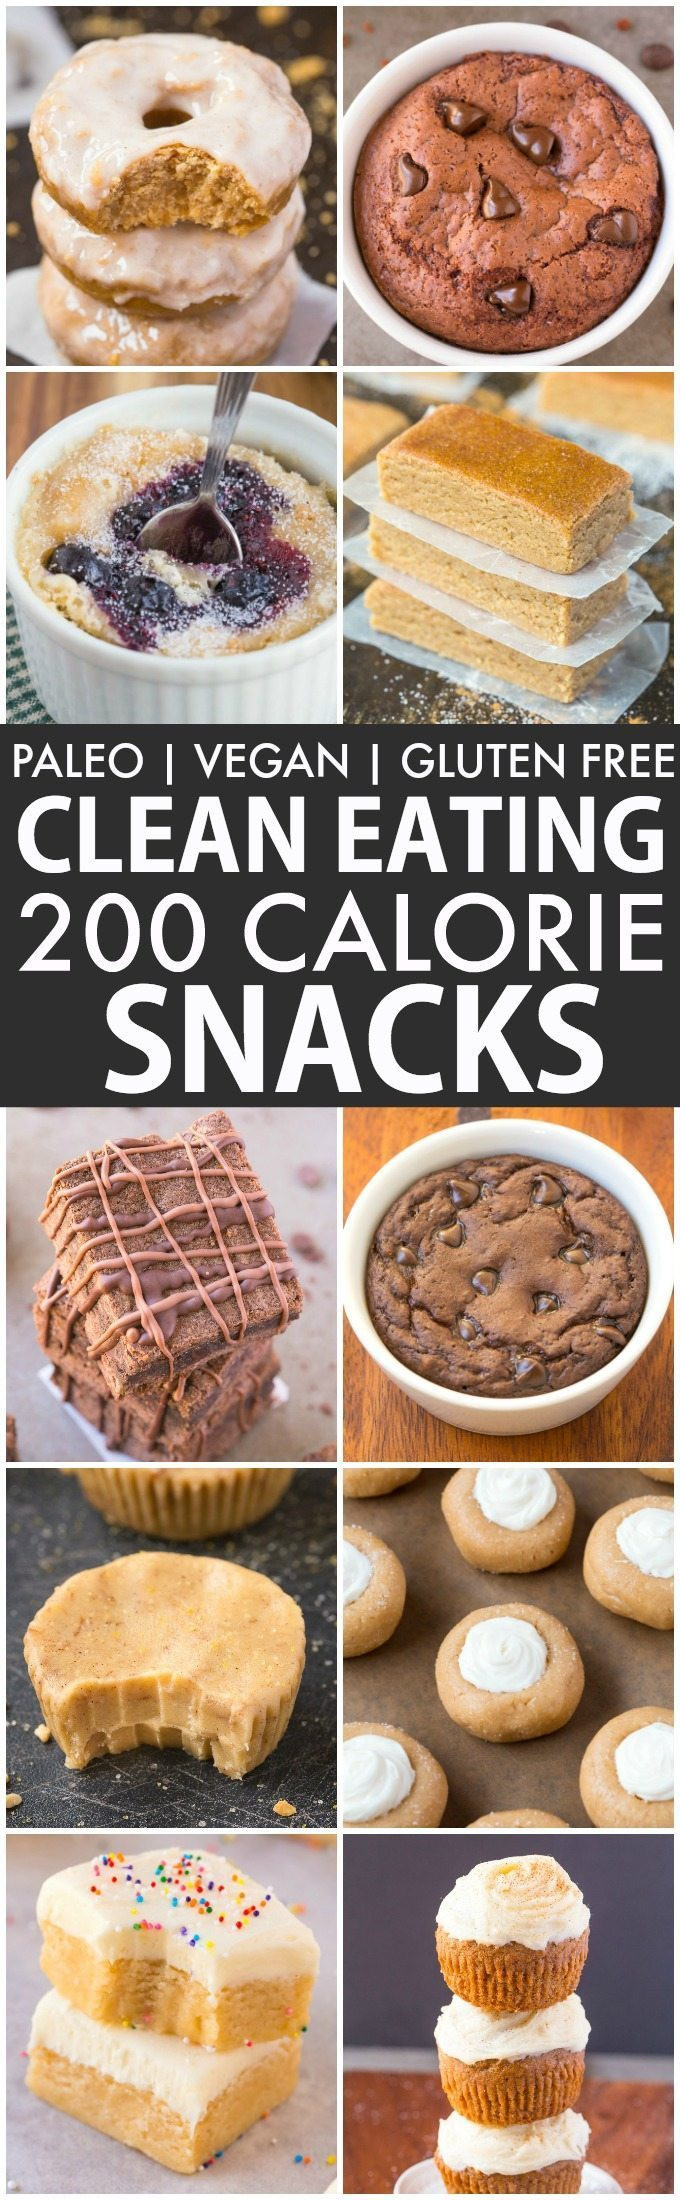 Healthy Filling Snacks For Work
 15 Healthy Desserts and Snacks Under 200 Calories